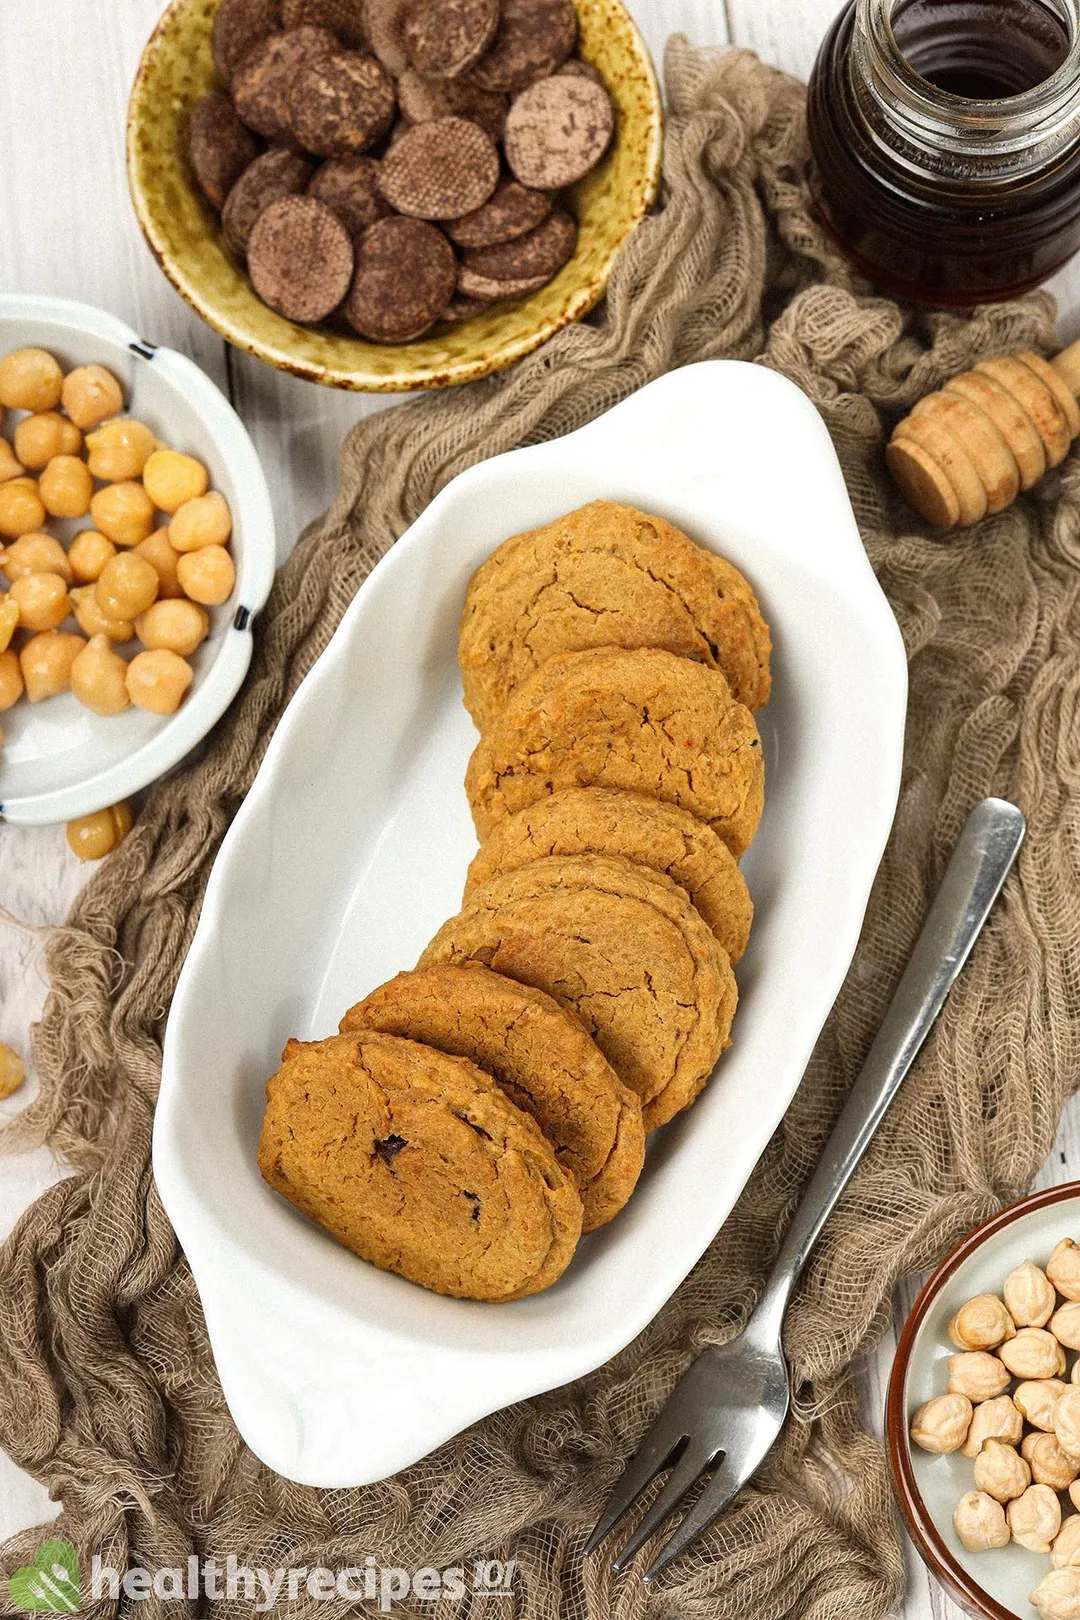 A small, rectangle baking dish holding chickpea cookies laid near a small bowl of chocolate chips, a bowl of chickpeas, and a jar of honey.